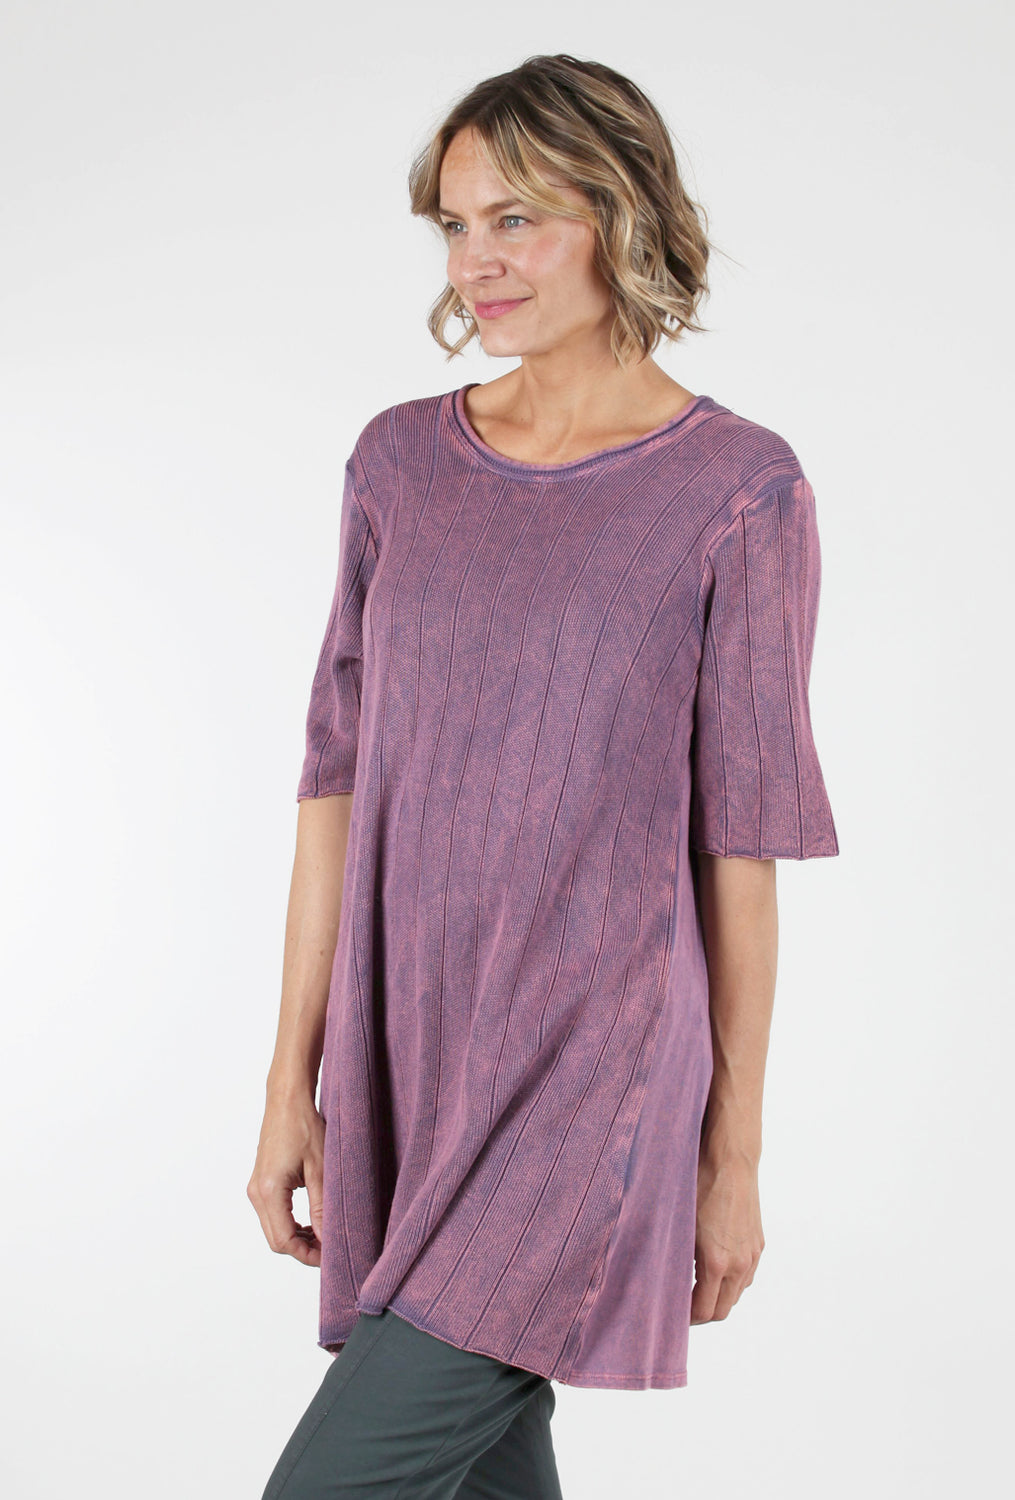 M. Rena Contrast Front Elbow Tunic , Lilac 